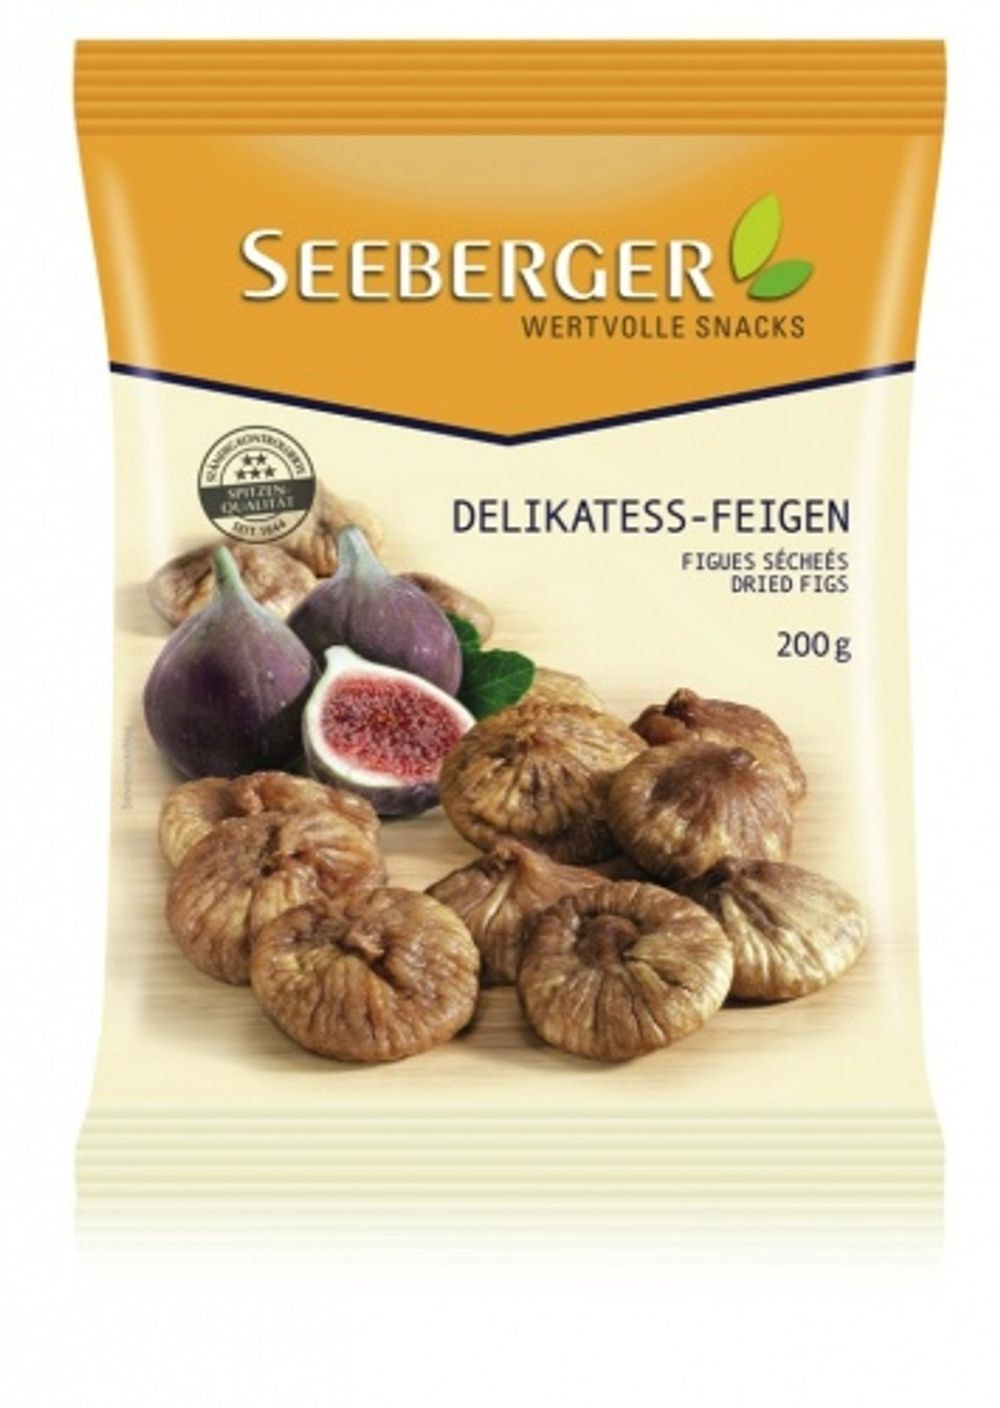 Dried figs, Seeberger, 200g